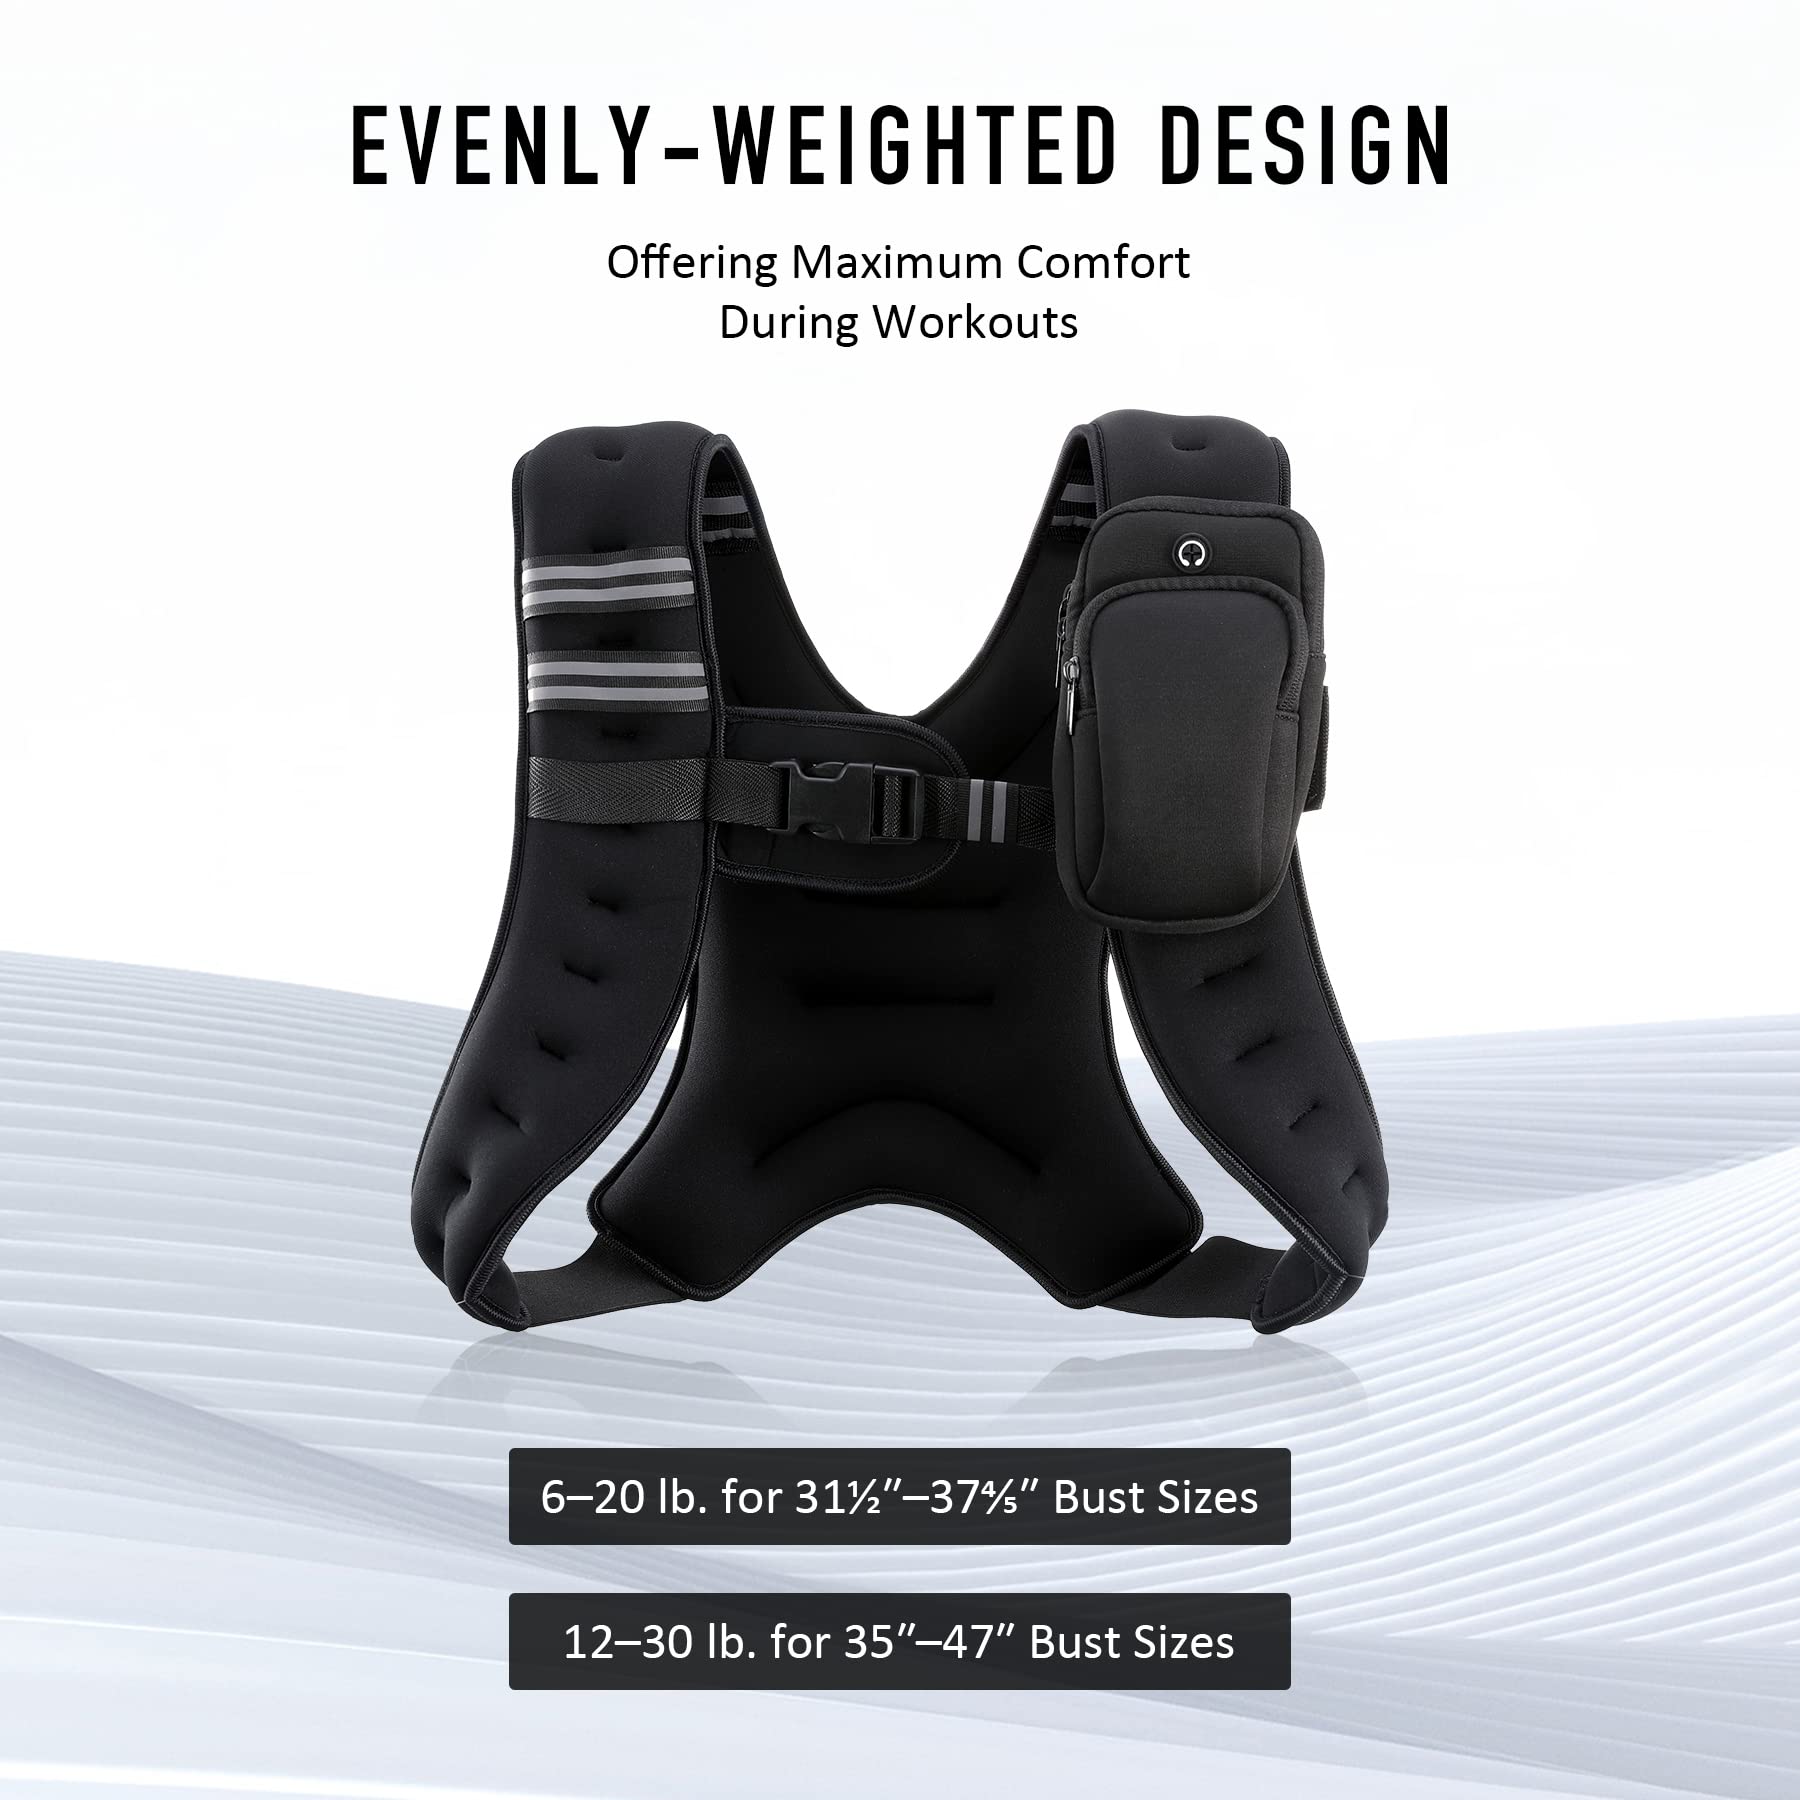 ZELUS Weighted Vest 12lb Weight Vest with Reflective Stripe for Workout, Strength Training, Running, Fitness, Muscle Building, Weight Loss, Weightlifting